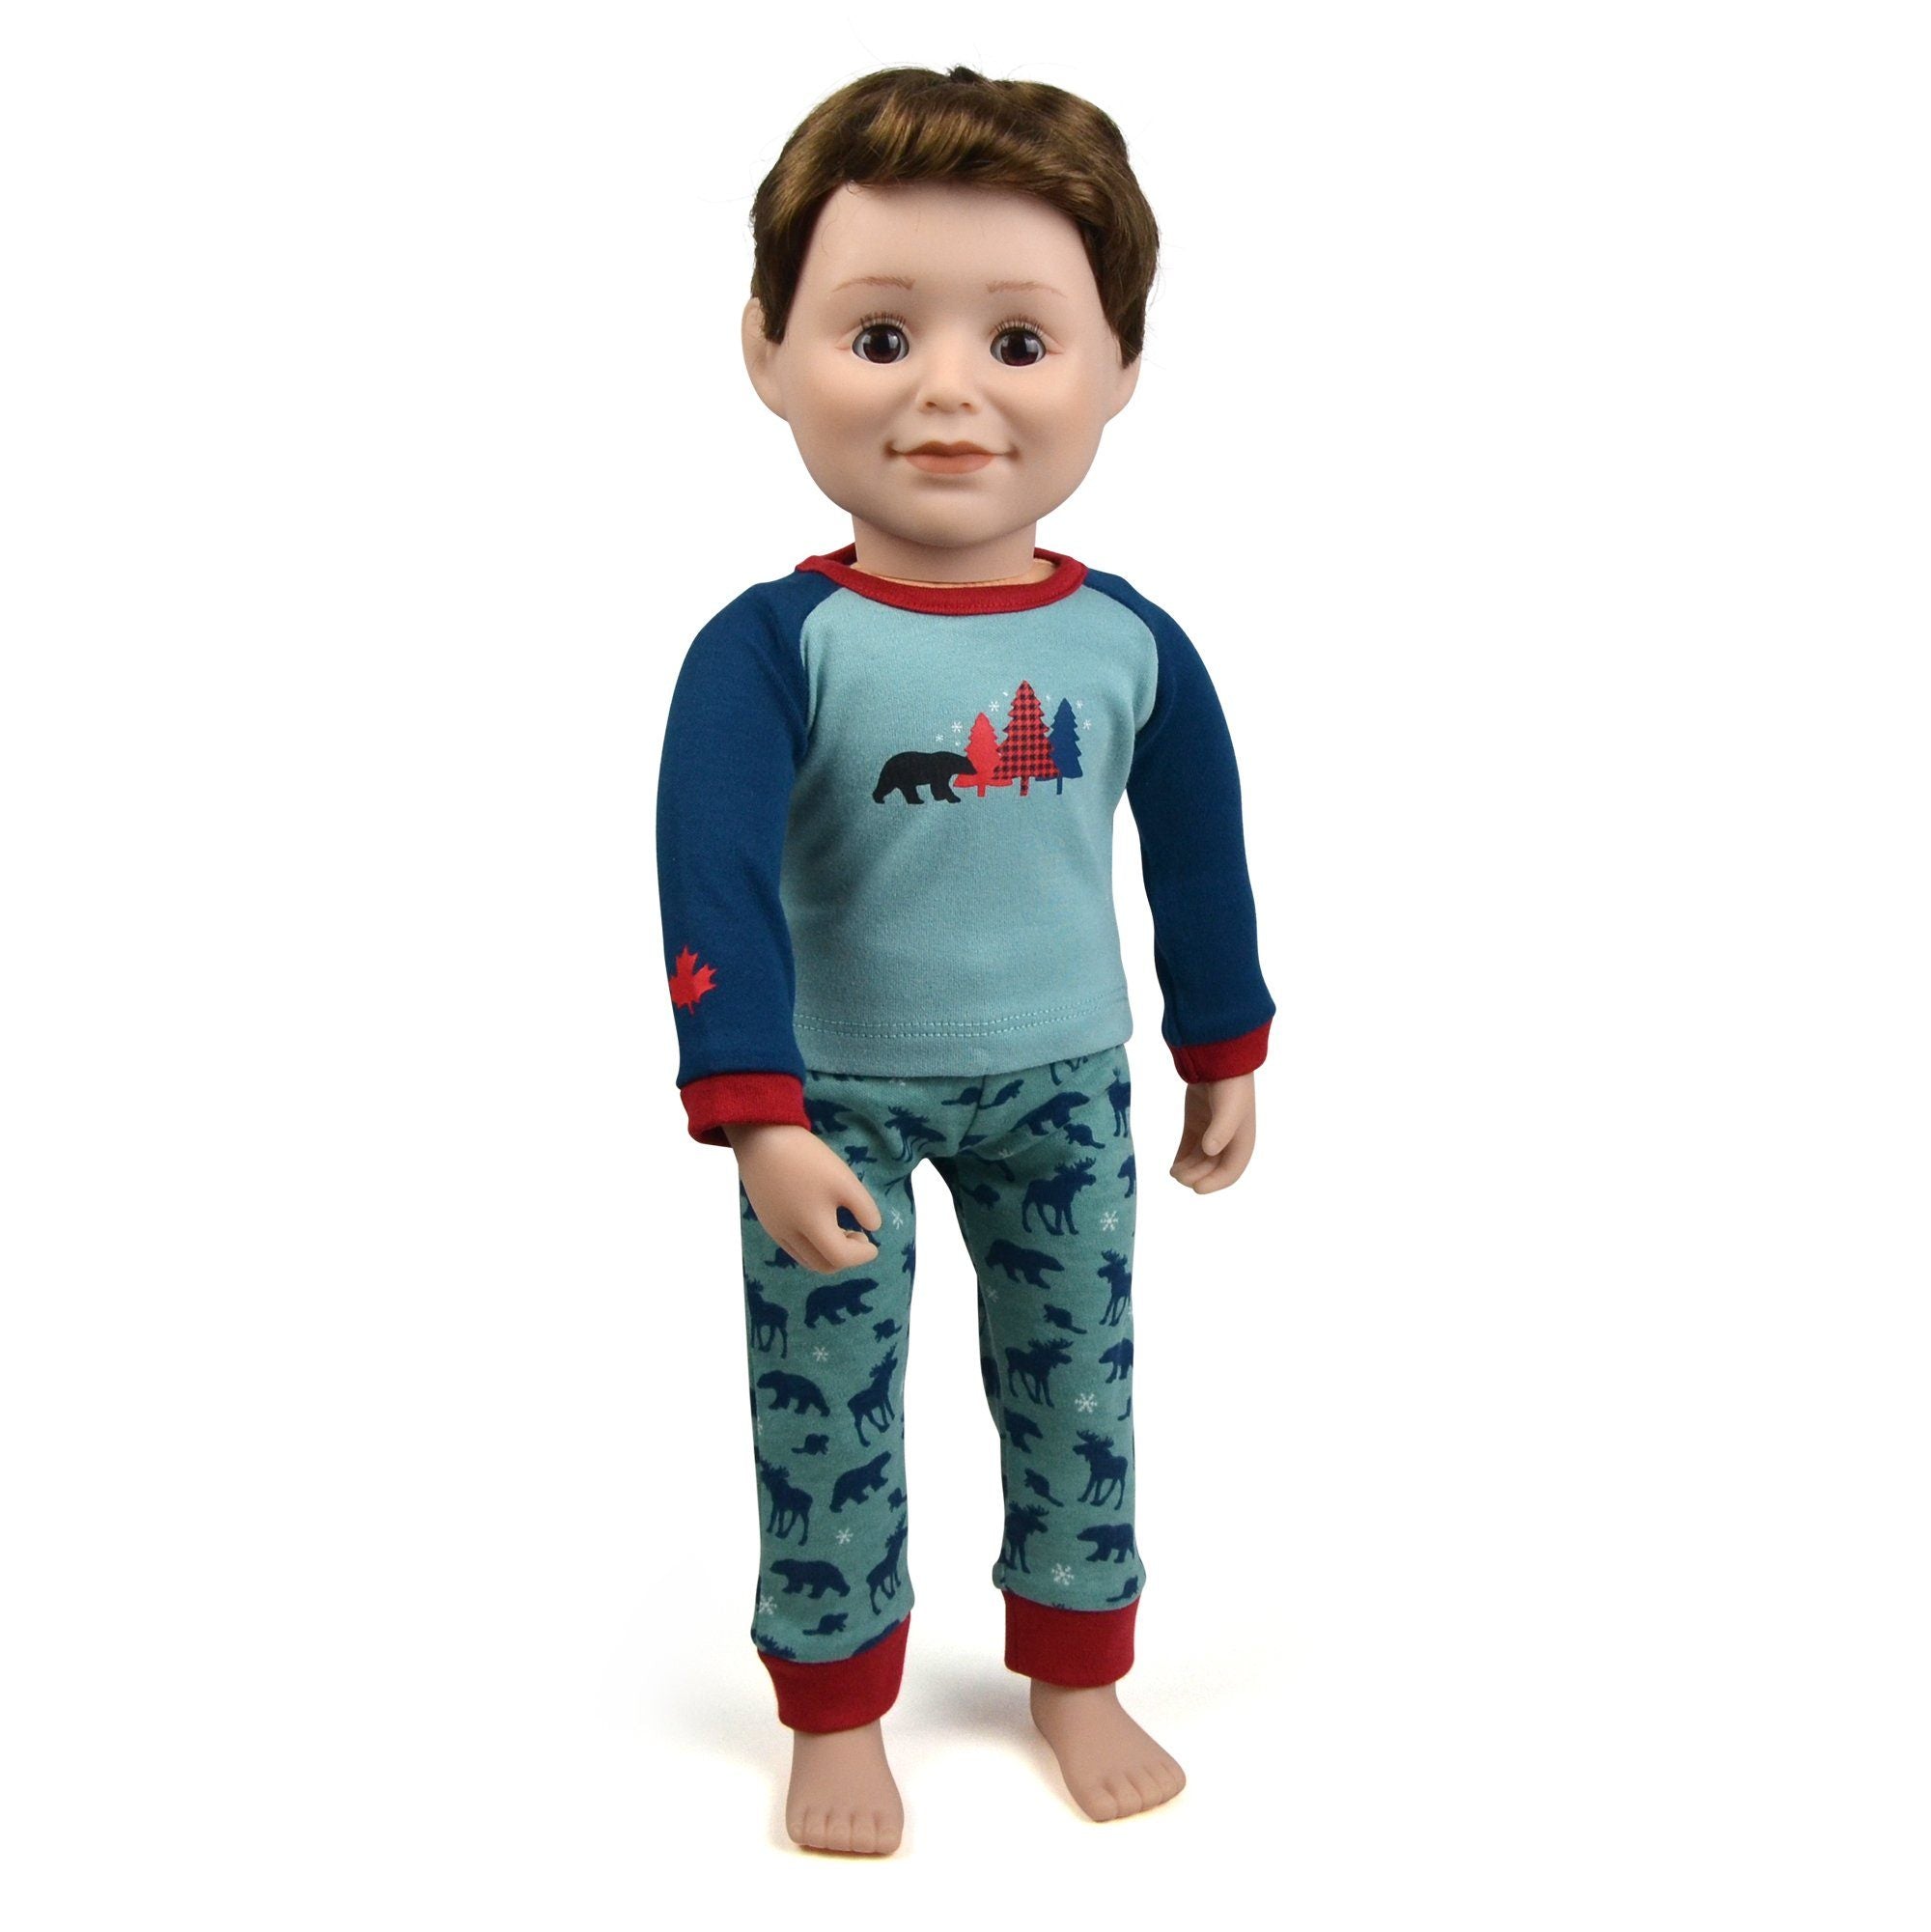 Blue Spruce PJs for Dolls : 18 Inch Dolls can match the whole family!